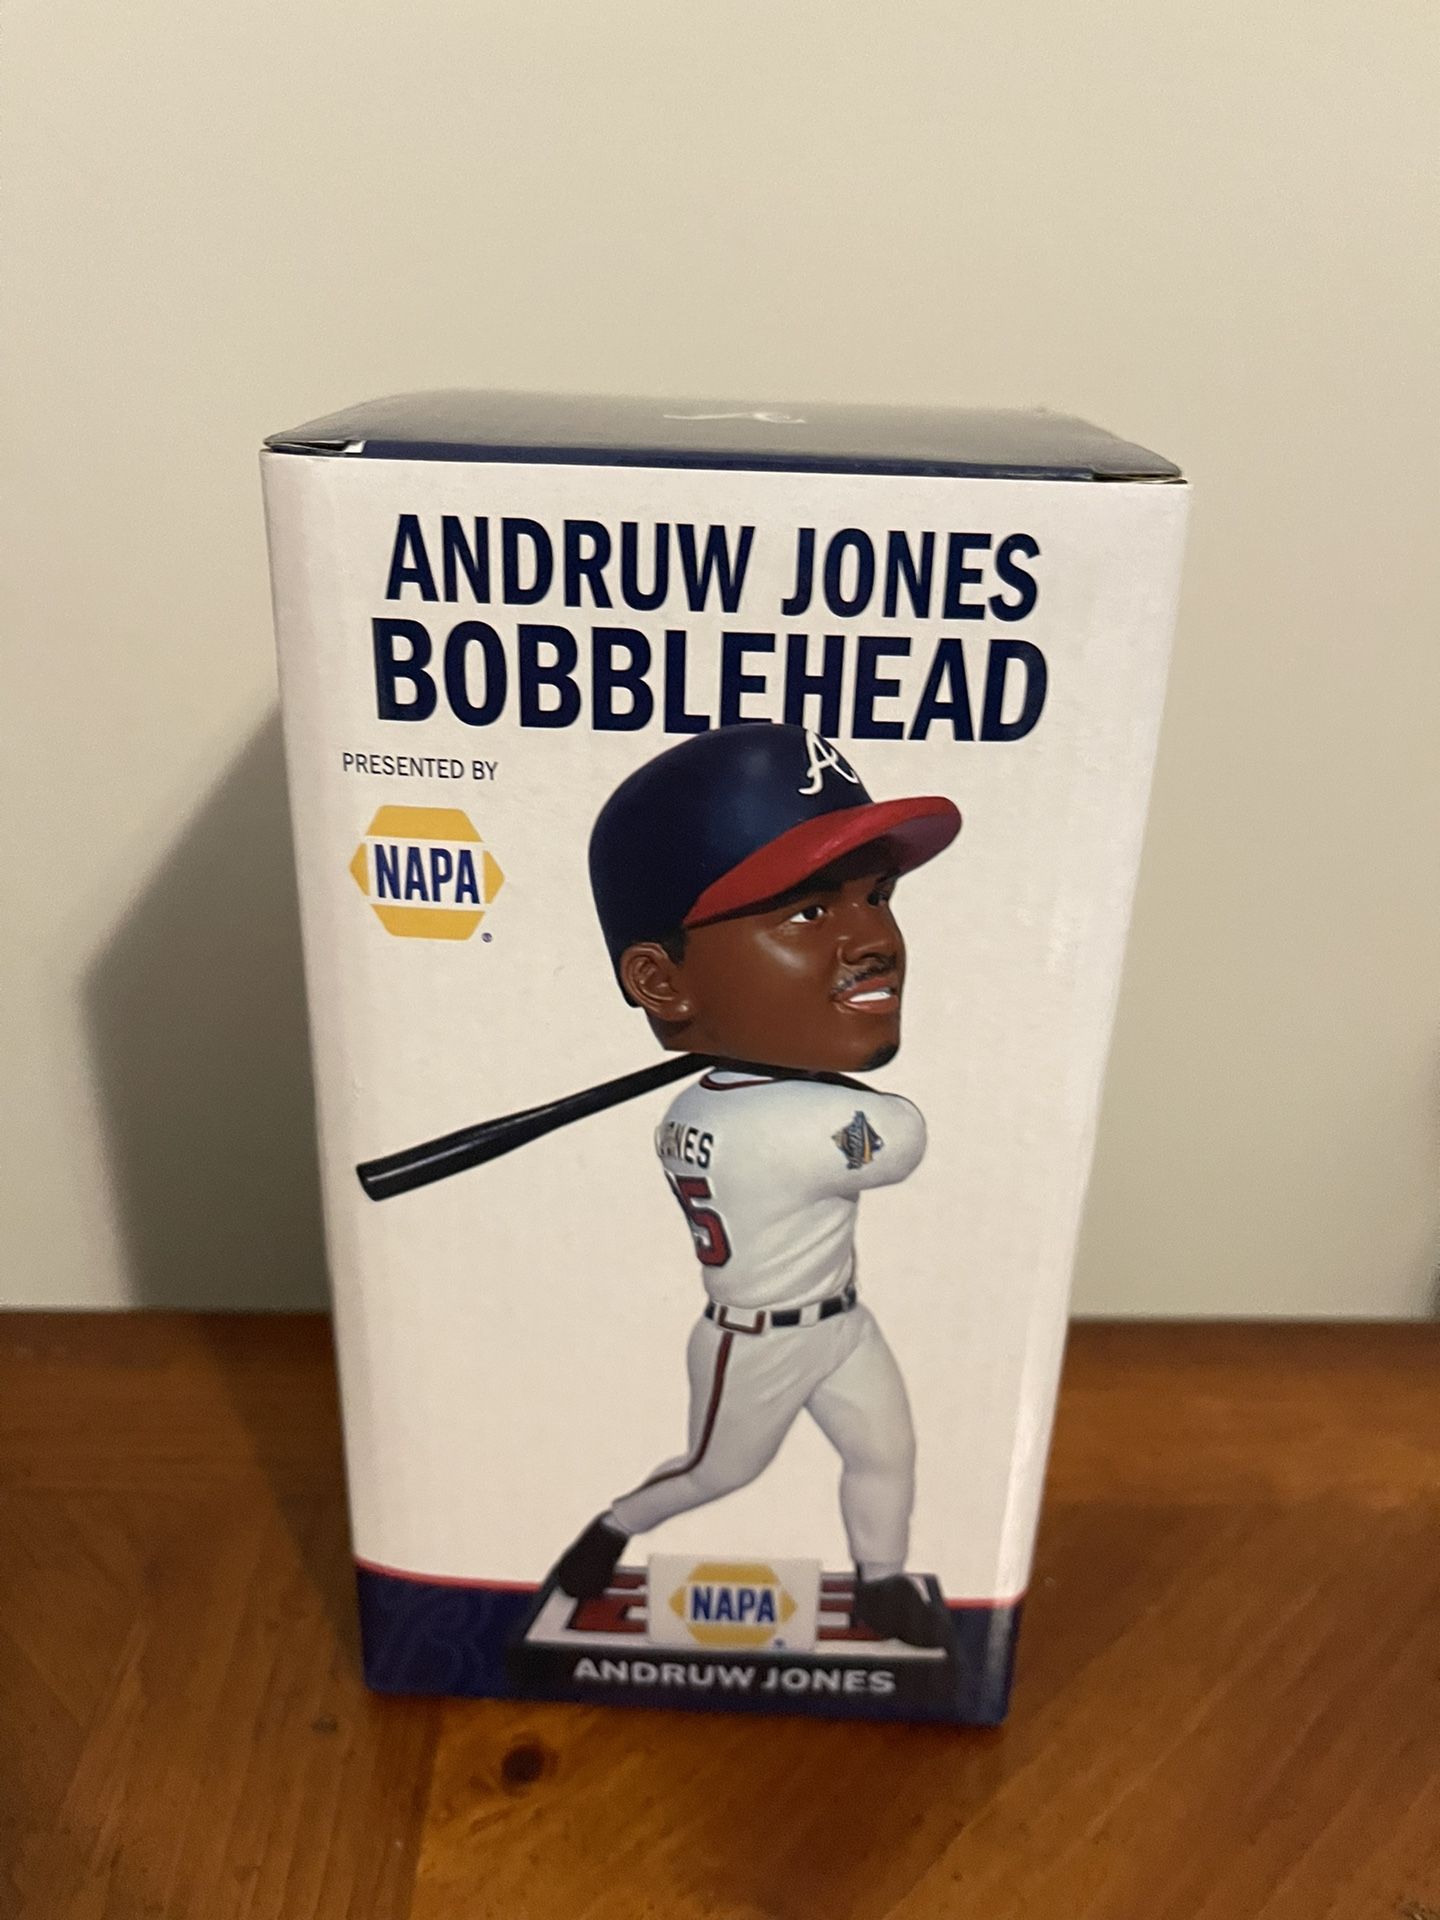 Andruw Jones bobble head. Comes from a smoke free home. Never taken out of box.